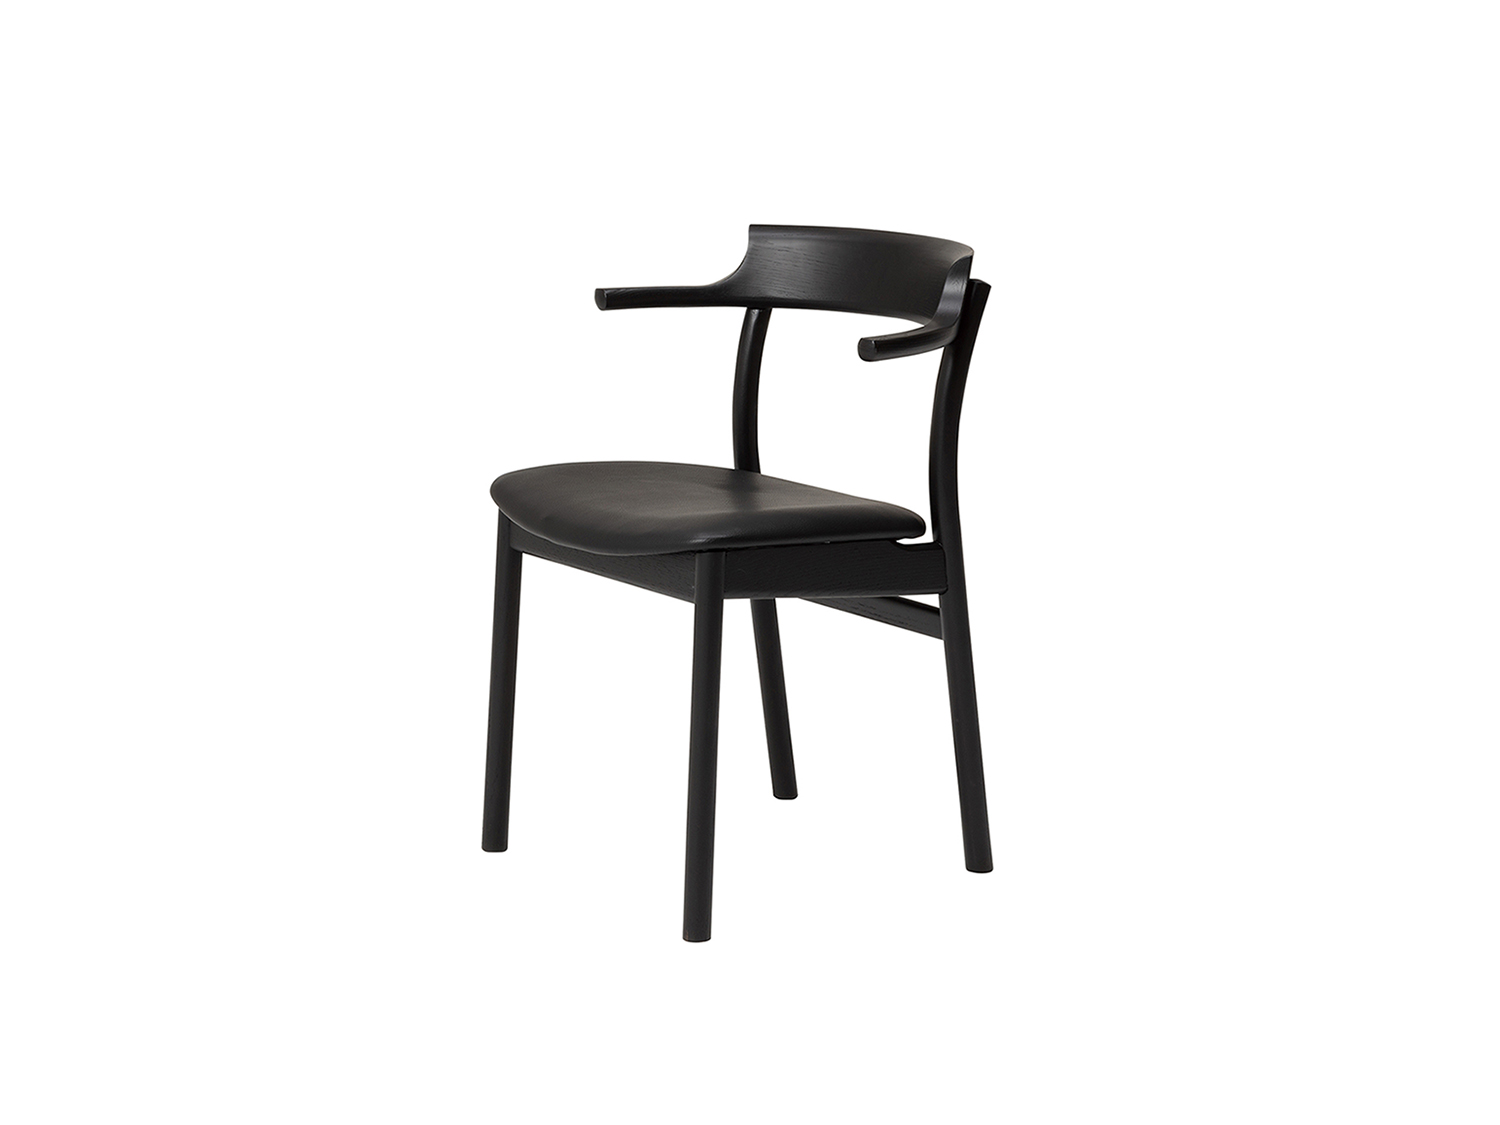 SOUP DINING CHAIR TYPE C